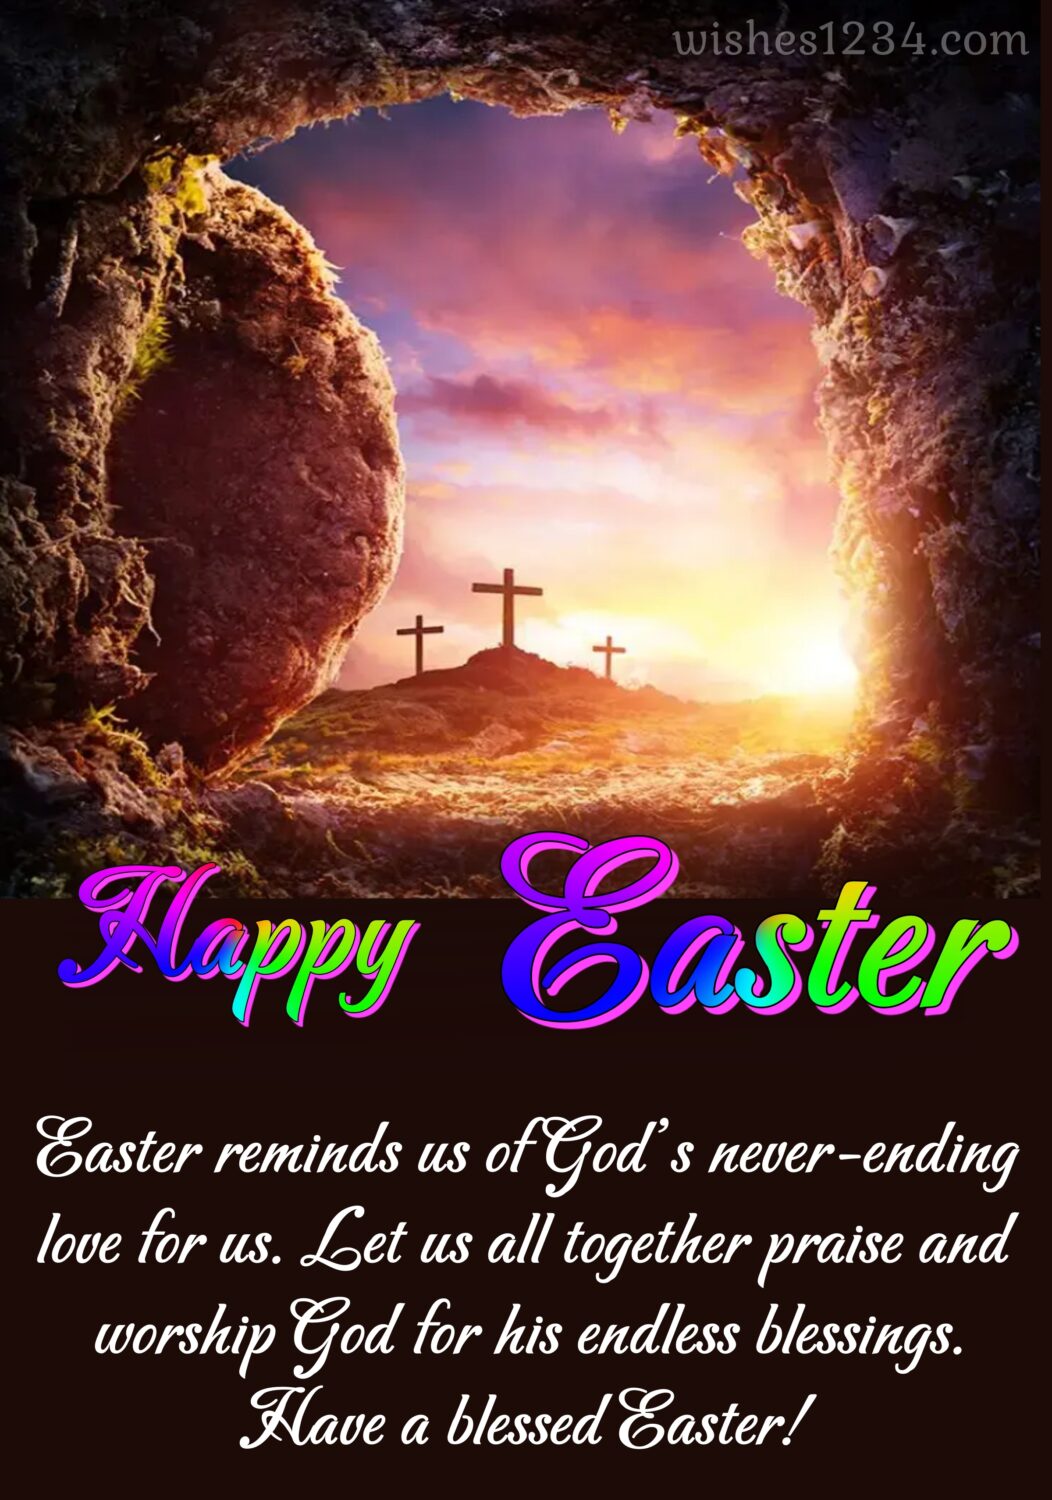 Cave with easter quote, Happy Easter Wishes, Quotes & Images.